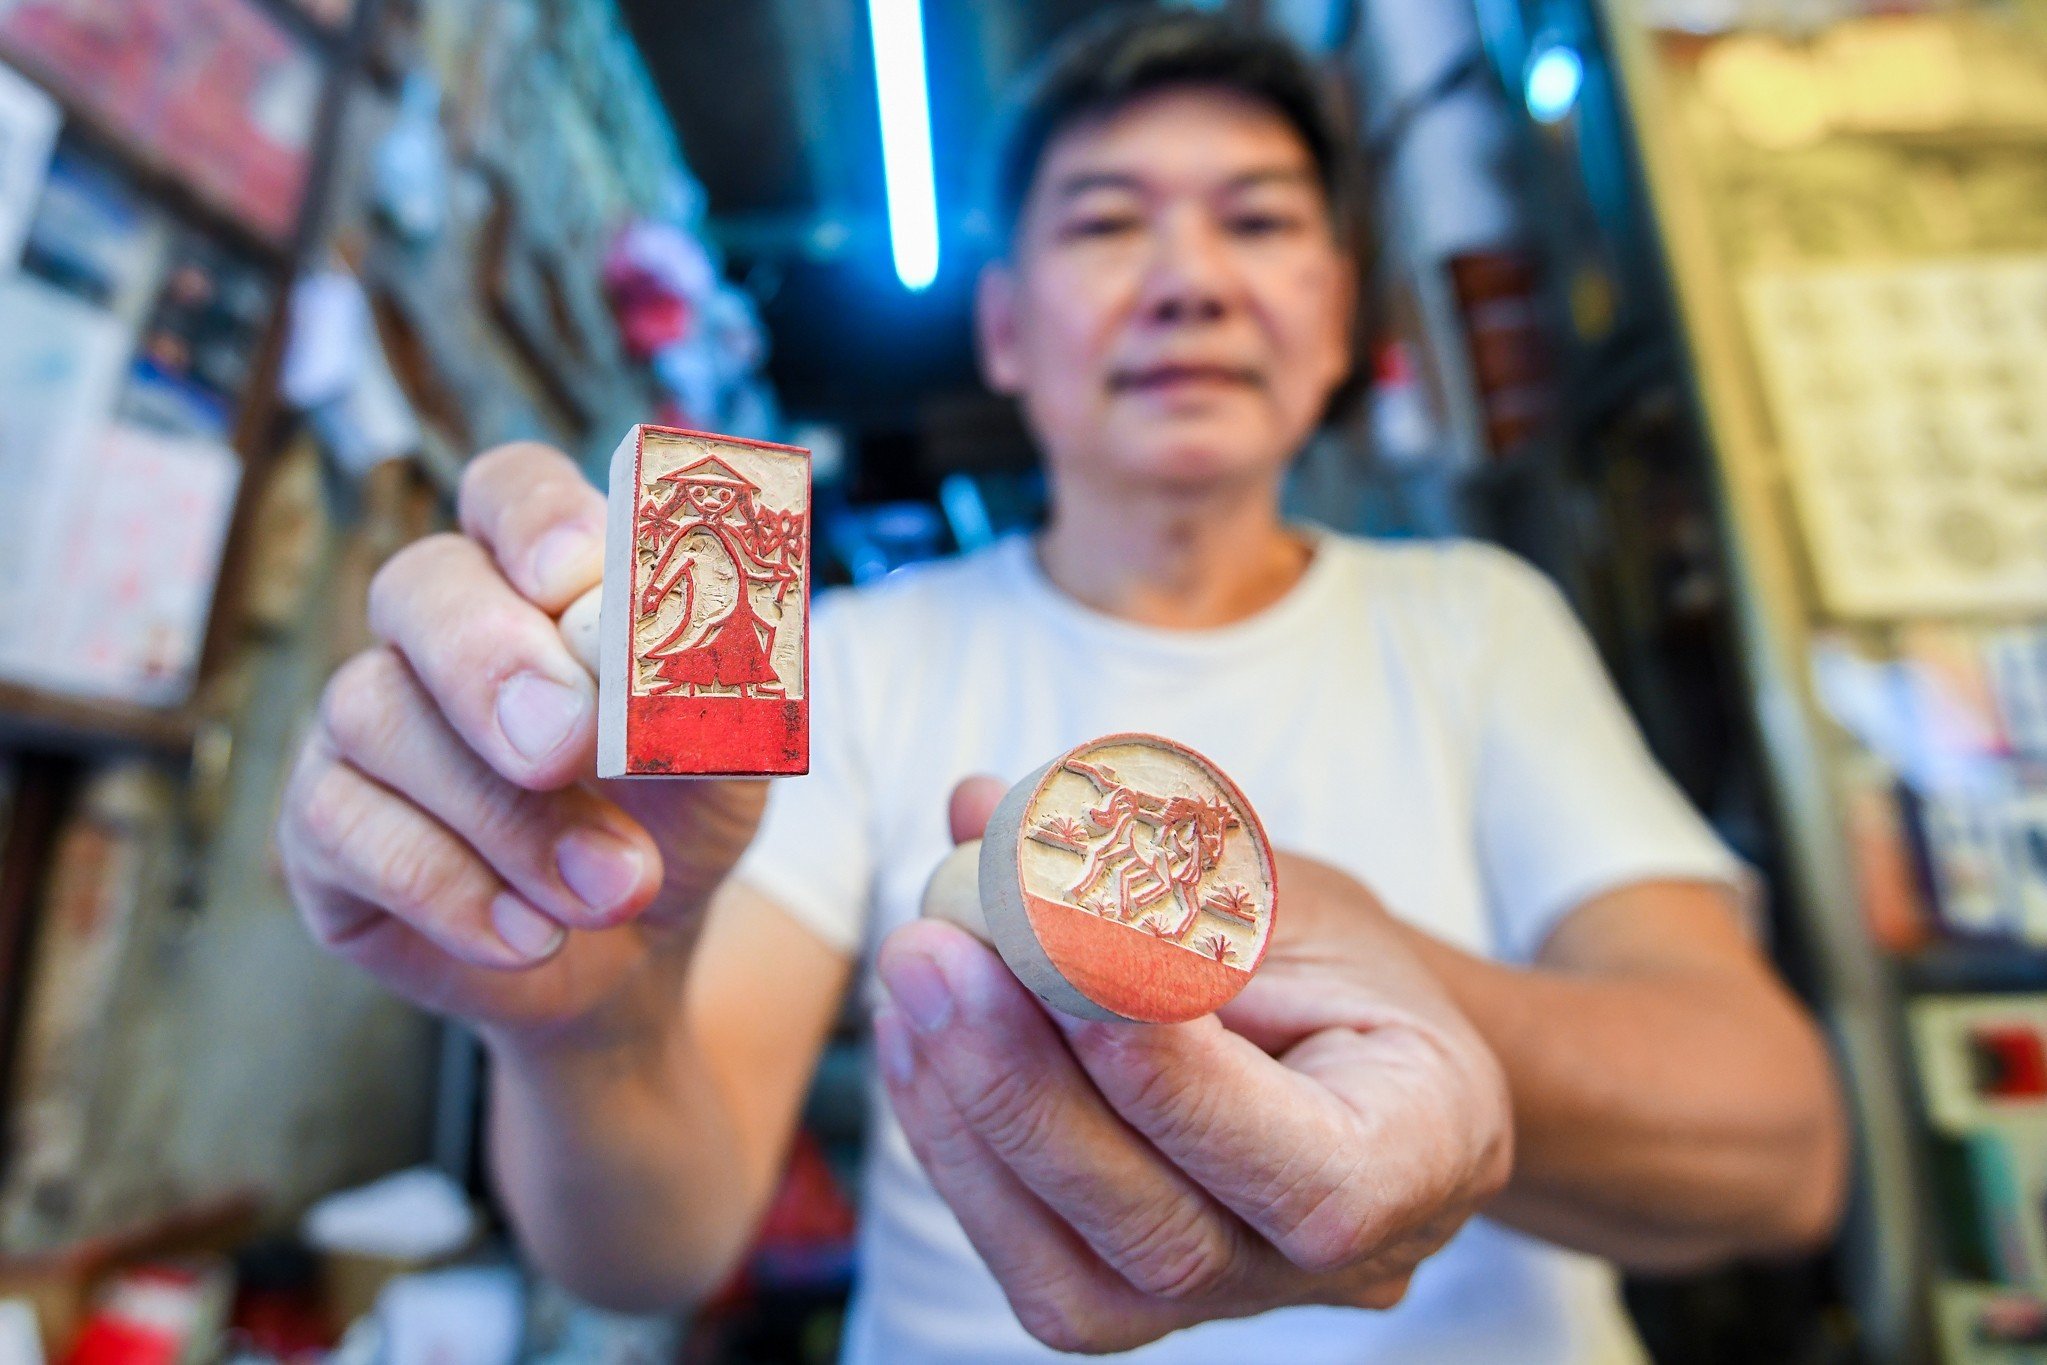 Toan holds two of the wooden stamps he made. Photo: Nam Tram / Tuoi Tre News